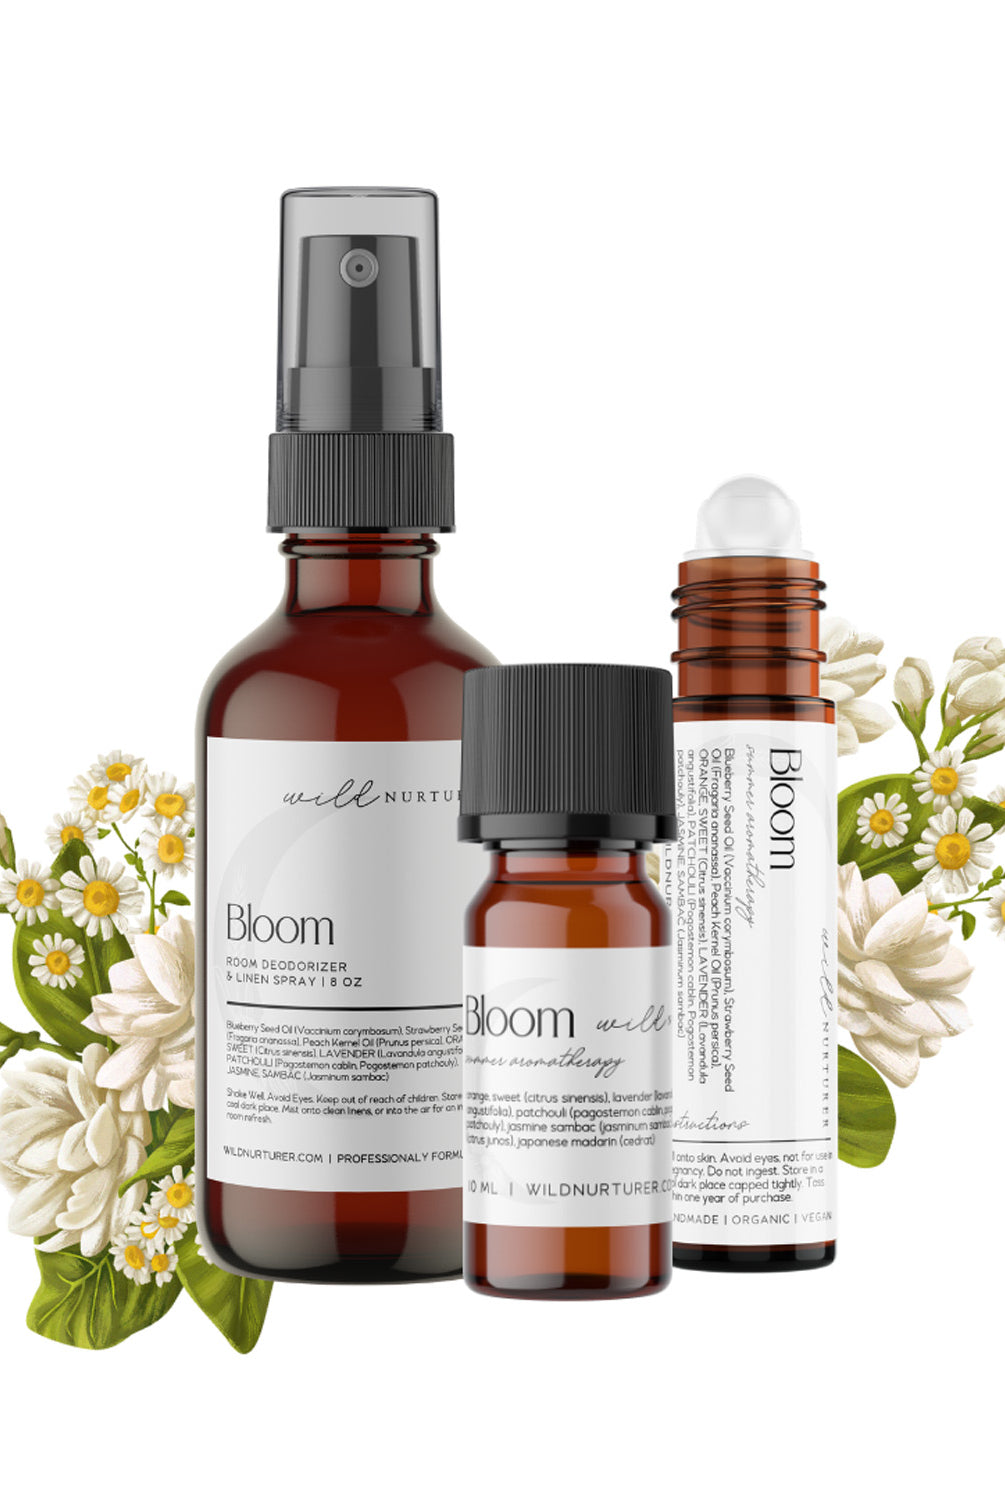 Three Bloom Exotic Aromatherapy & Skincare Blend products by Wild Nurturer Aromatherapy, featuring spray and dropper bottles surrounded by white floral accents on a white background.